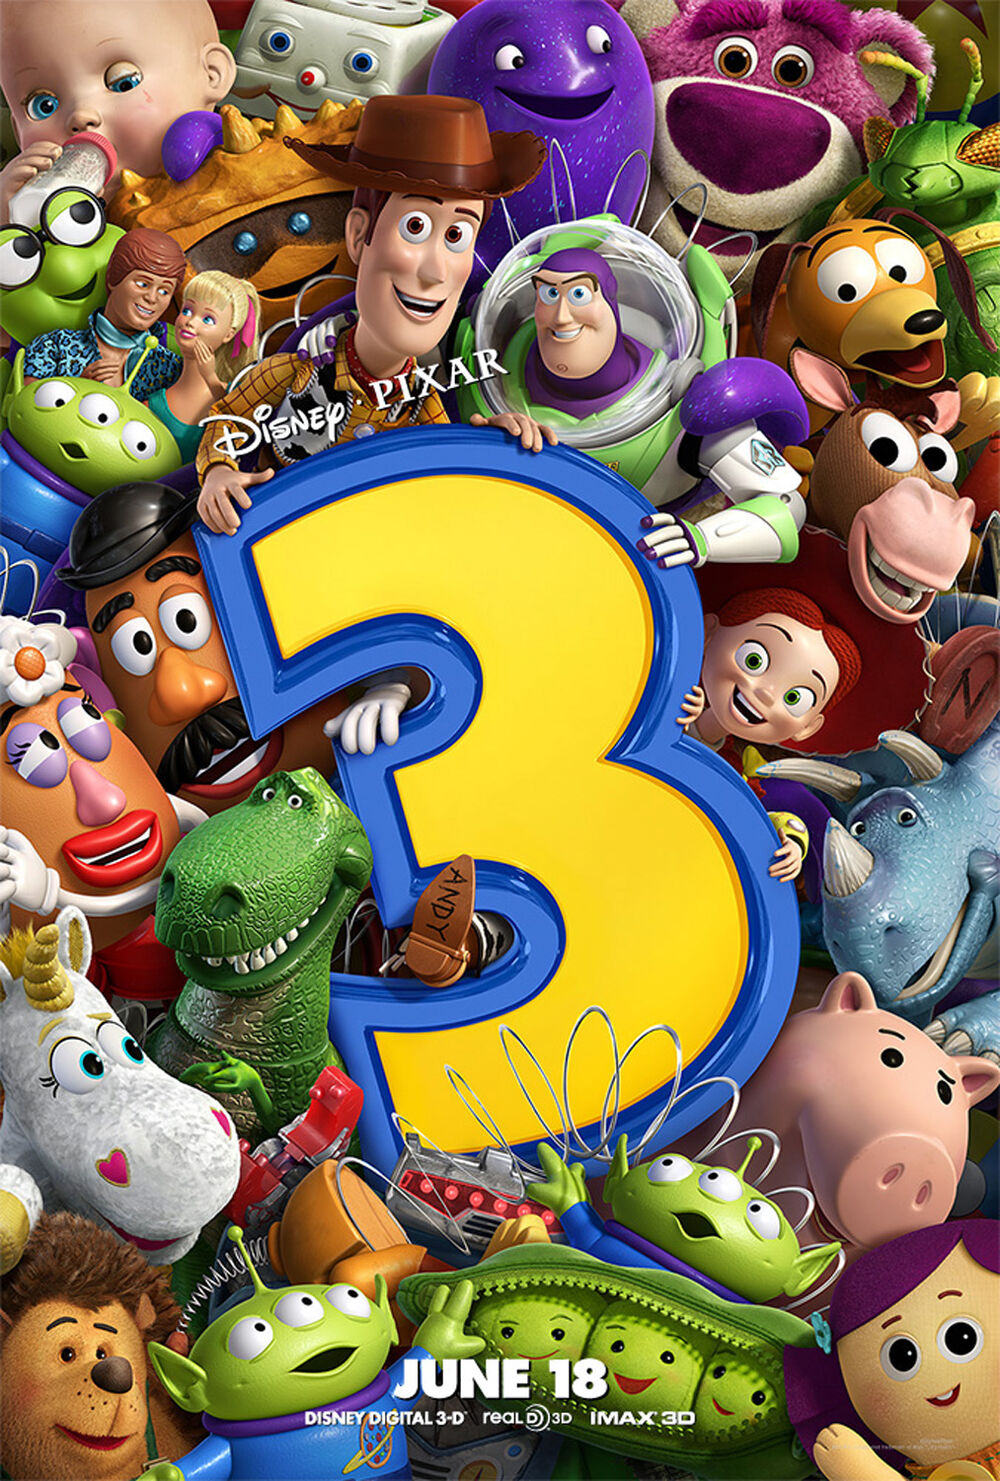 Toy Story 3 poster.jpg